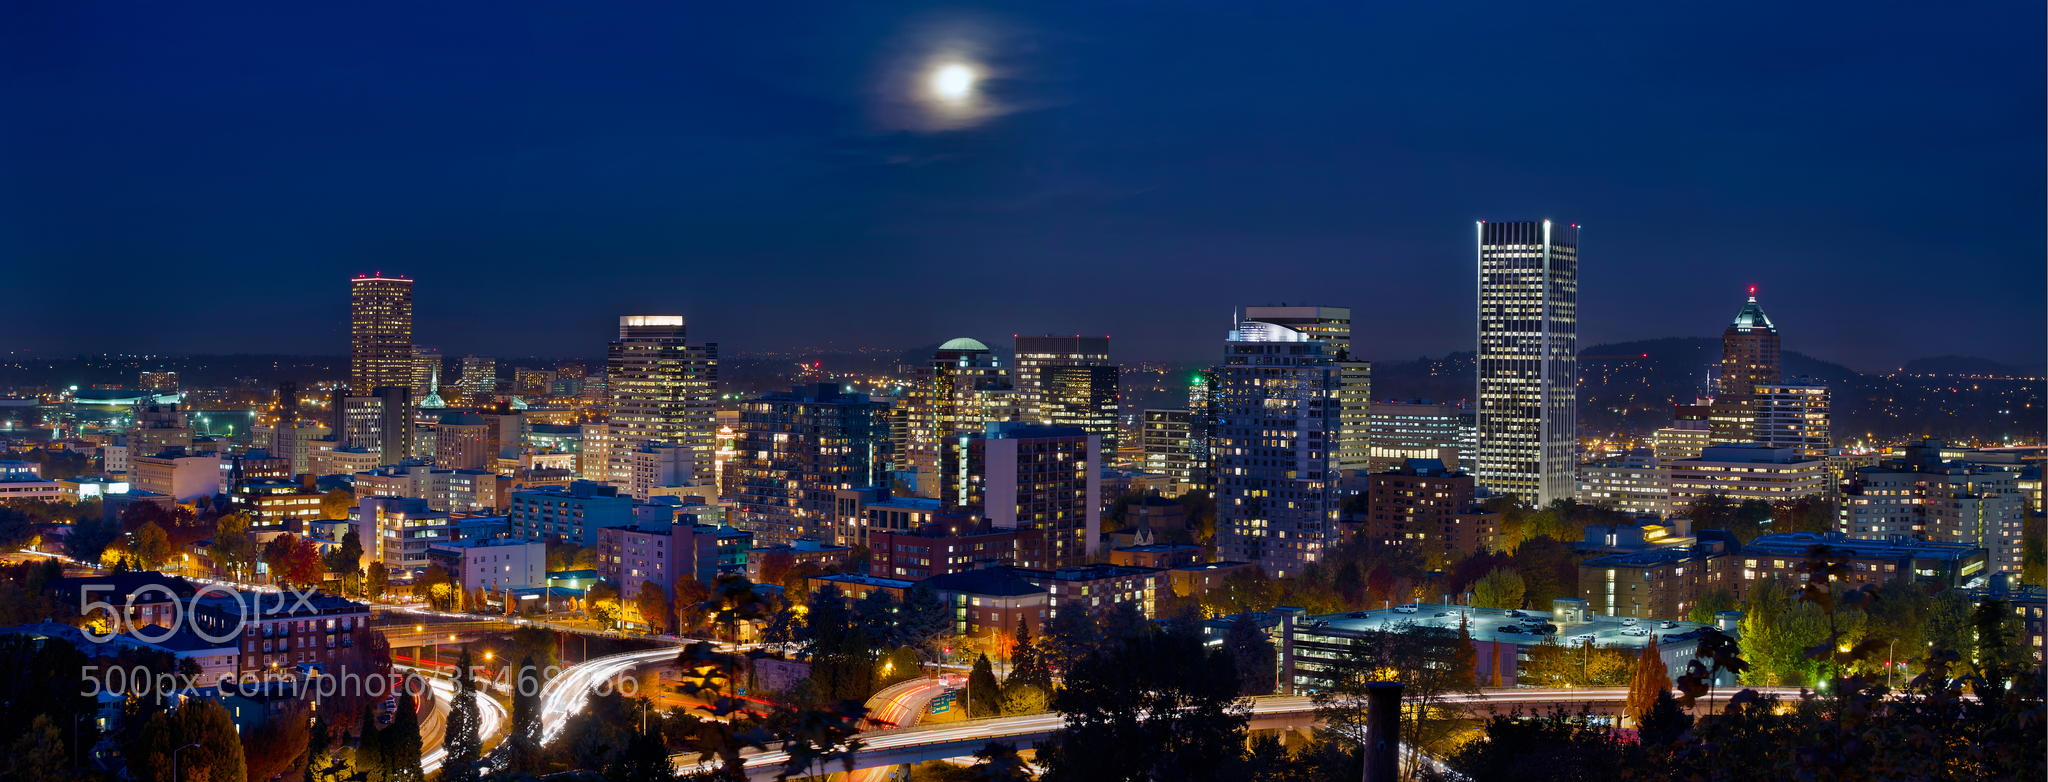 Photograph Moon Over Portland Oregon City Skyline at Blue Hour by Jit